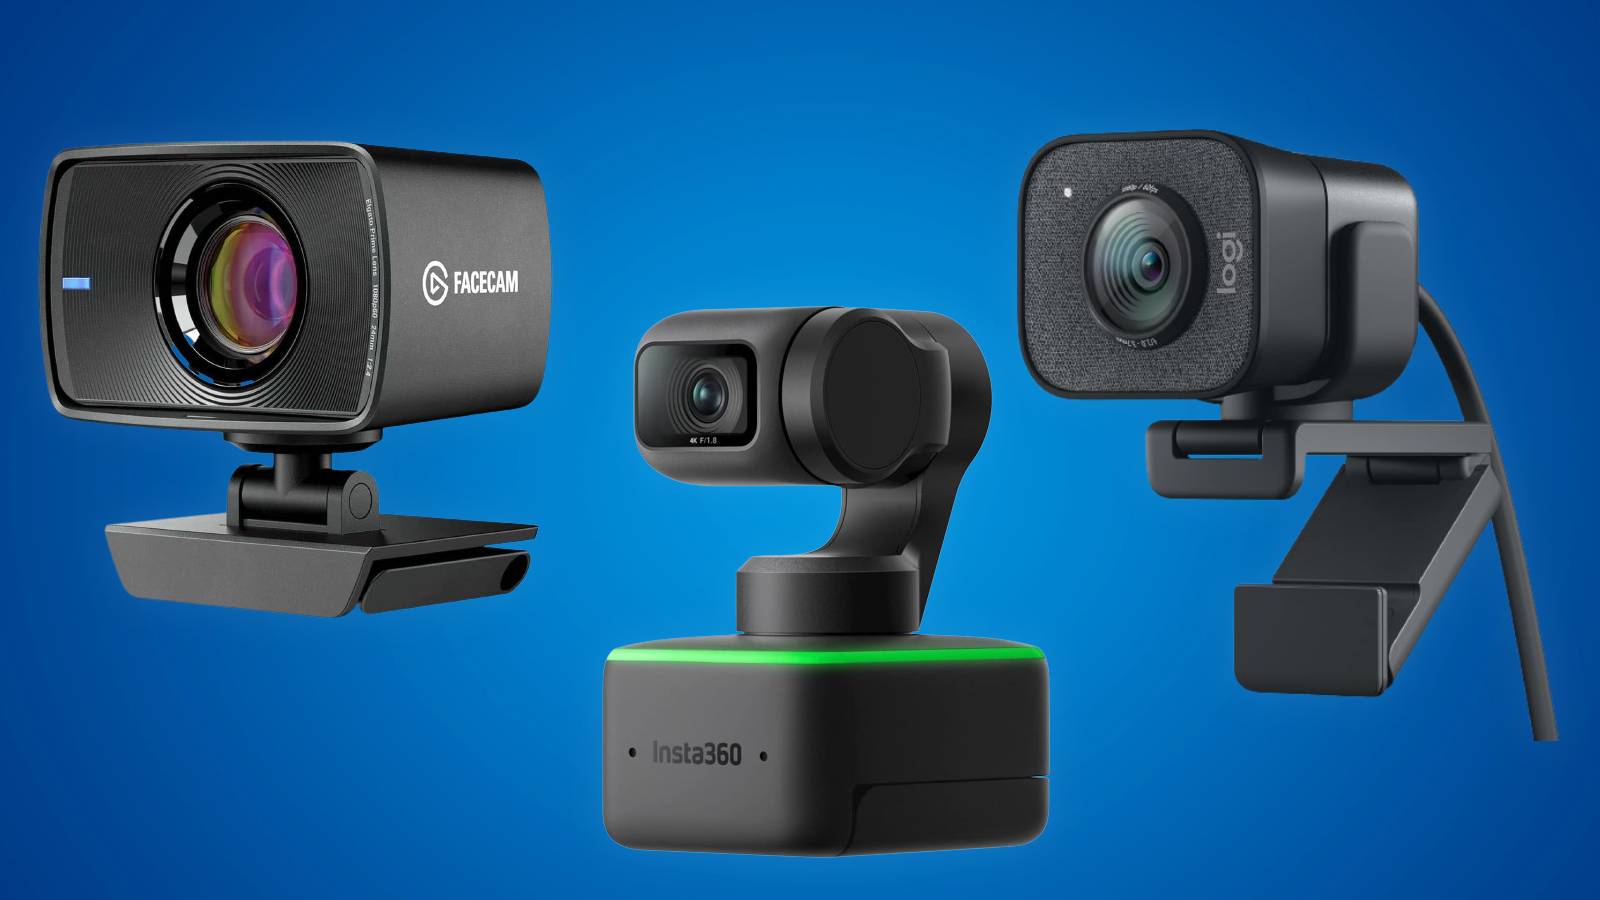 The World's First 4K60 Webcam: Elgato Launches Facecam Pro